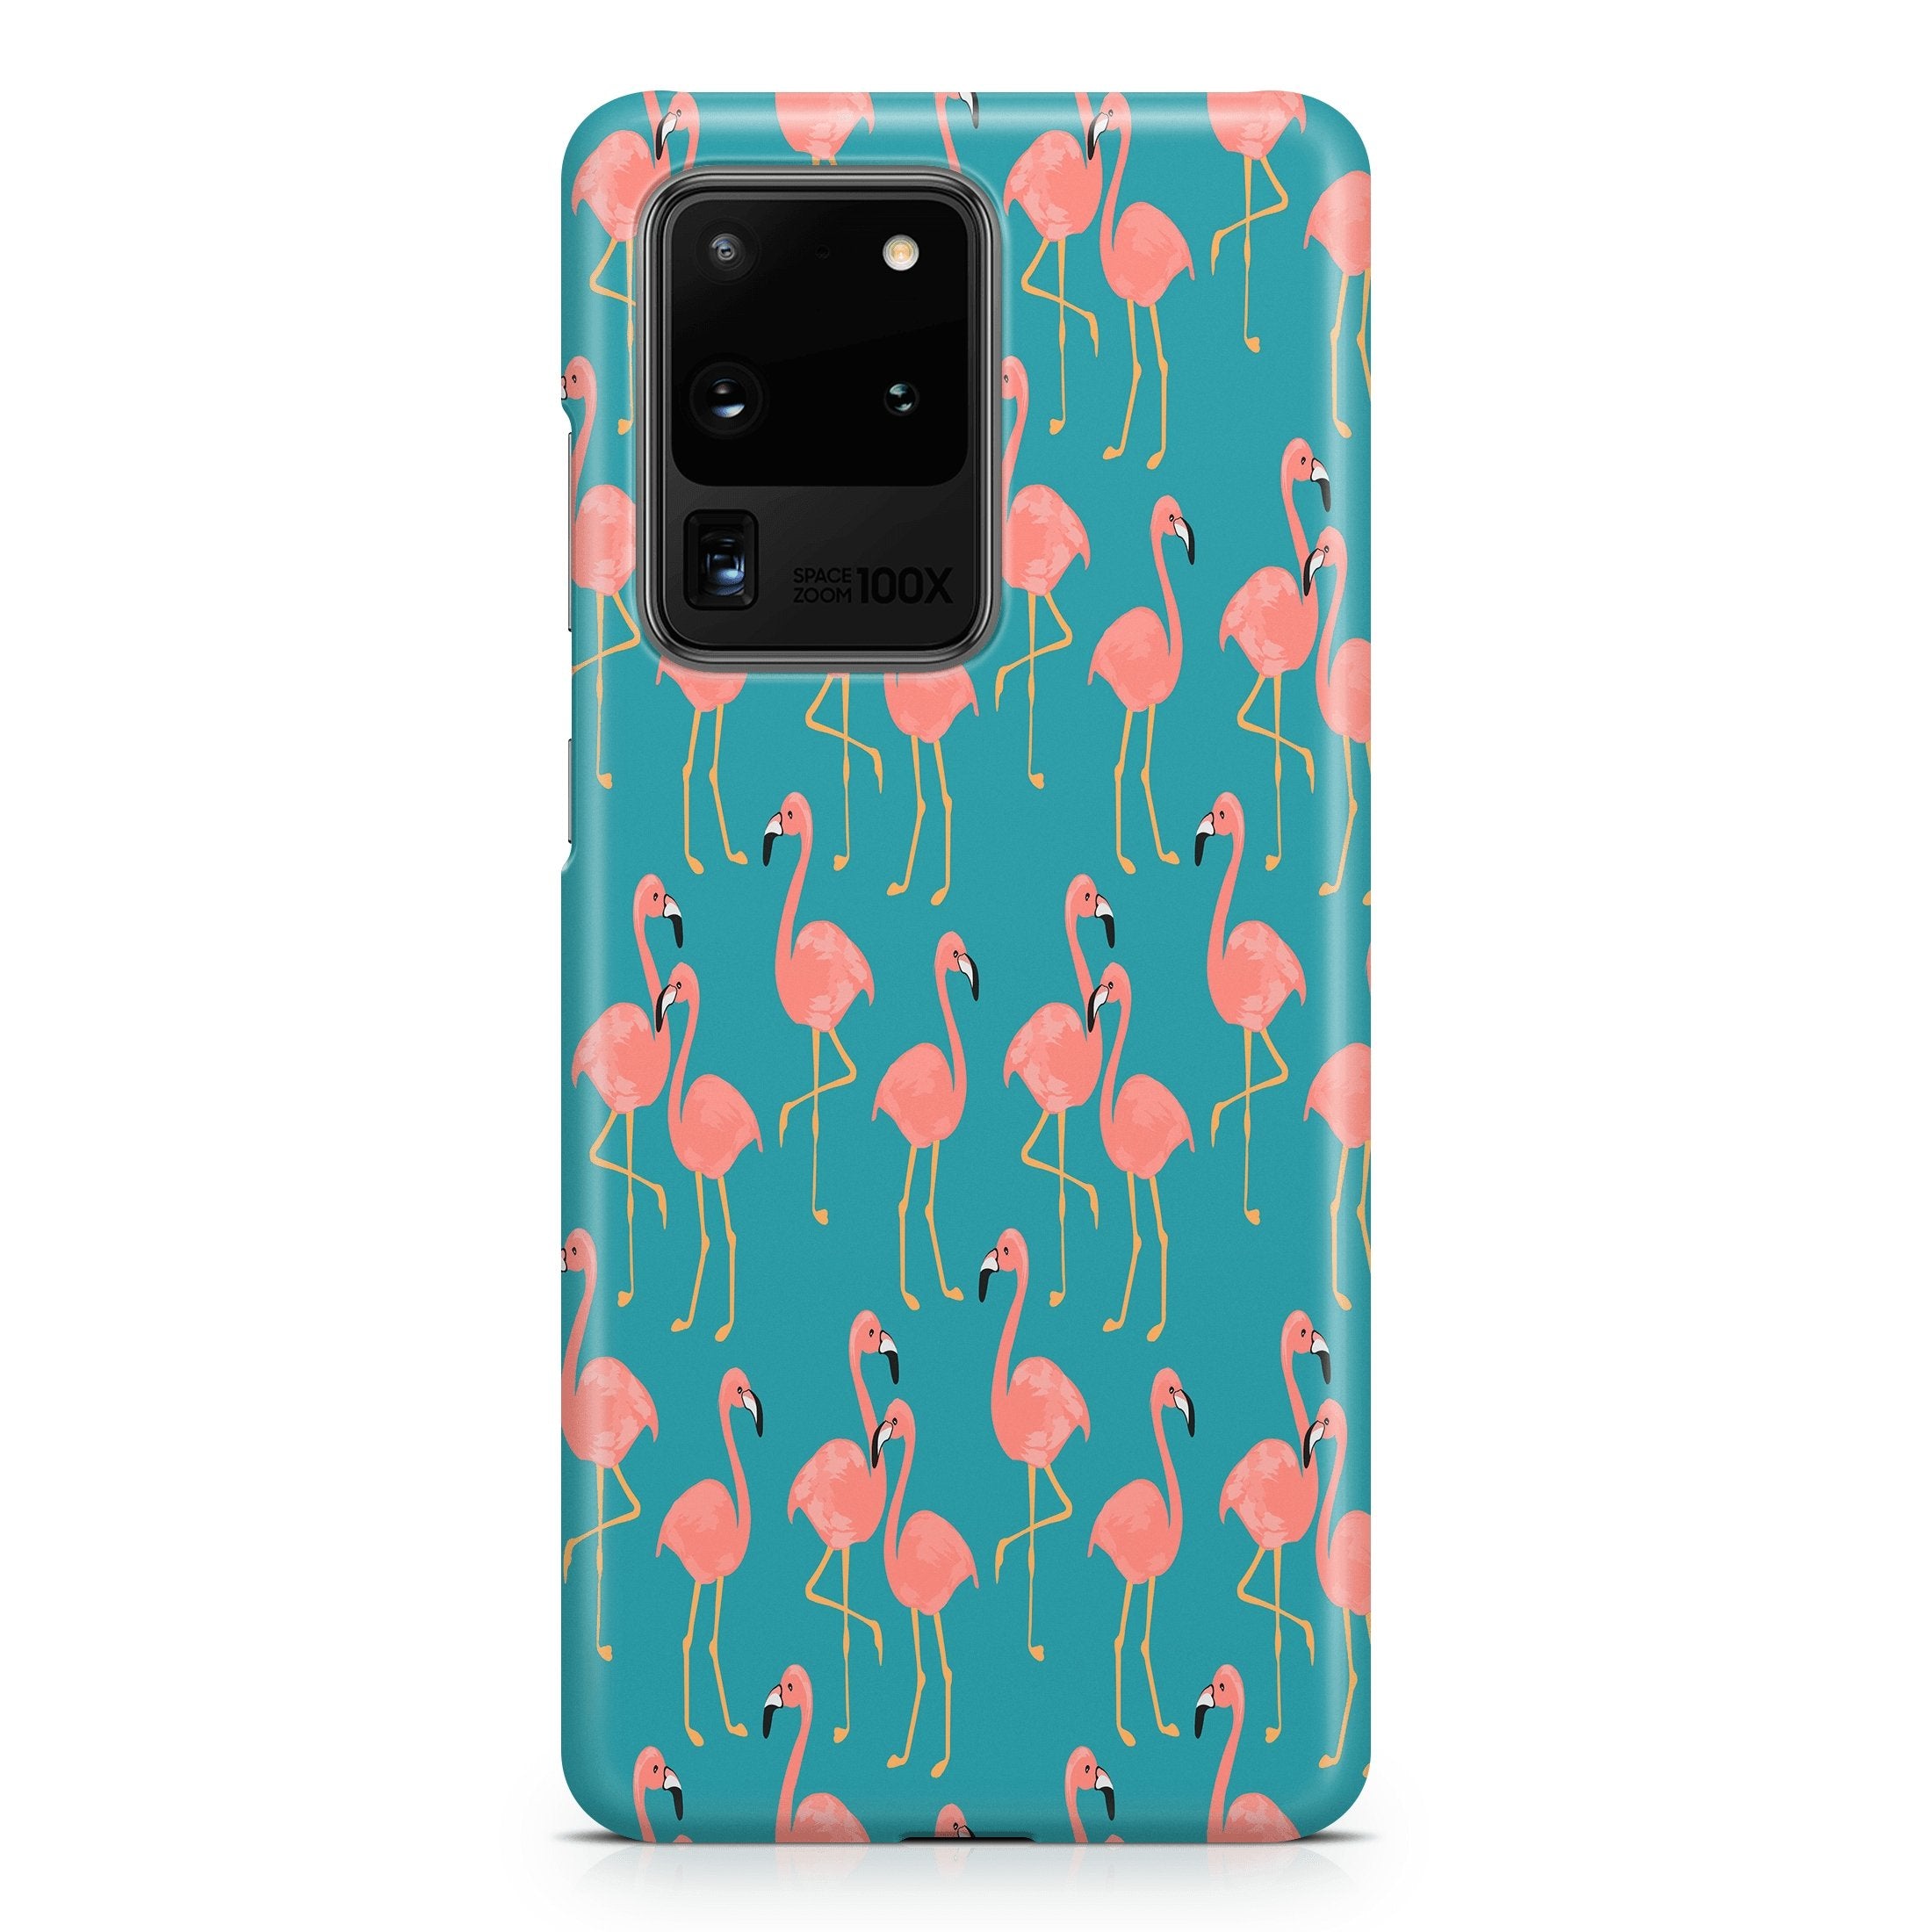 Flamingo Fiesta - Samsung phone case designs by CaseSwagger